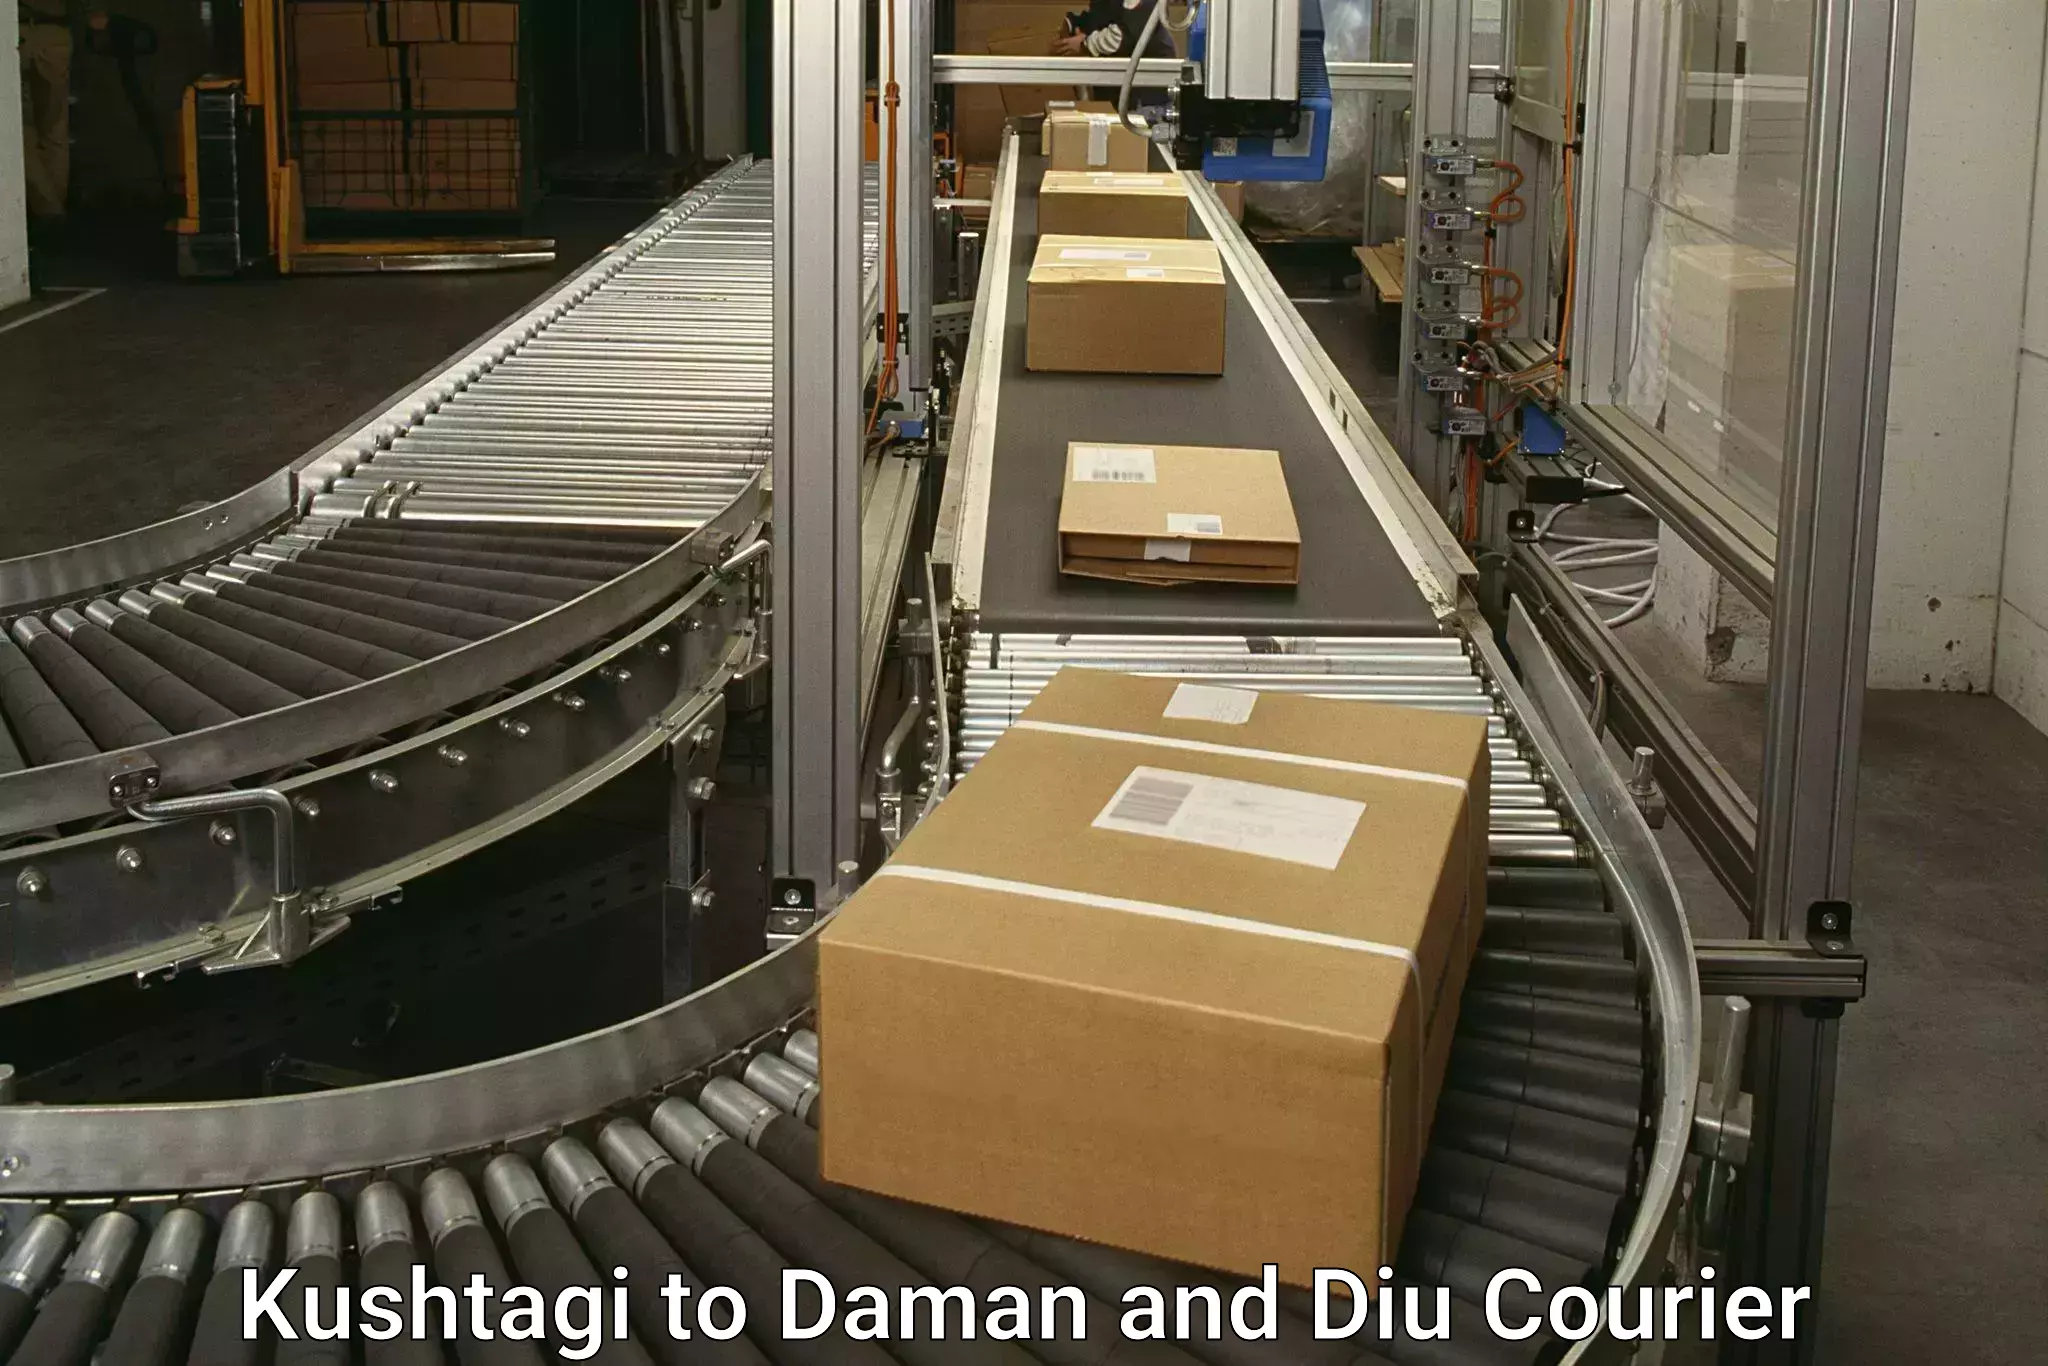 Parcel service for businesses Kushtagi to Daman and Diu